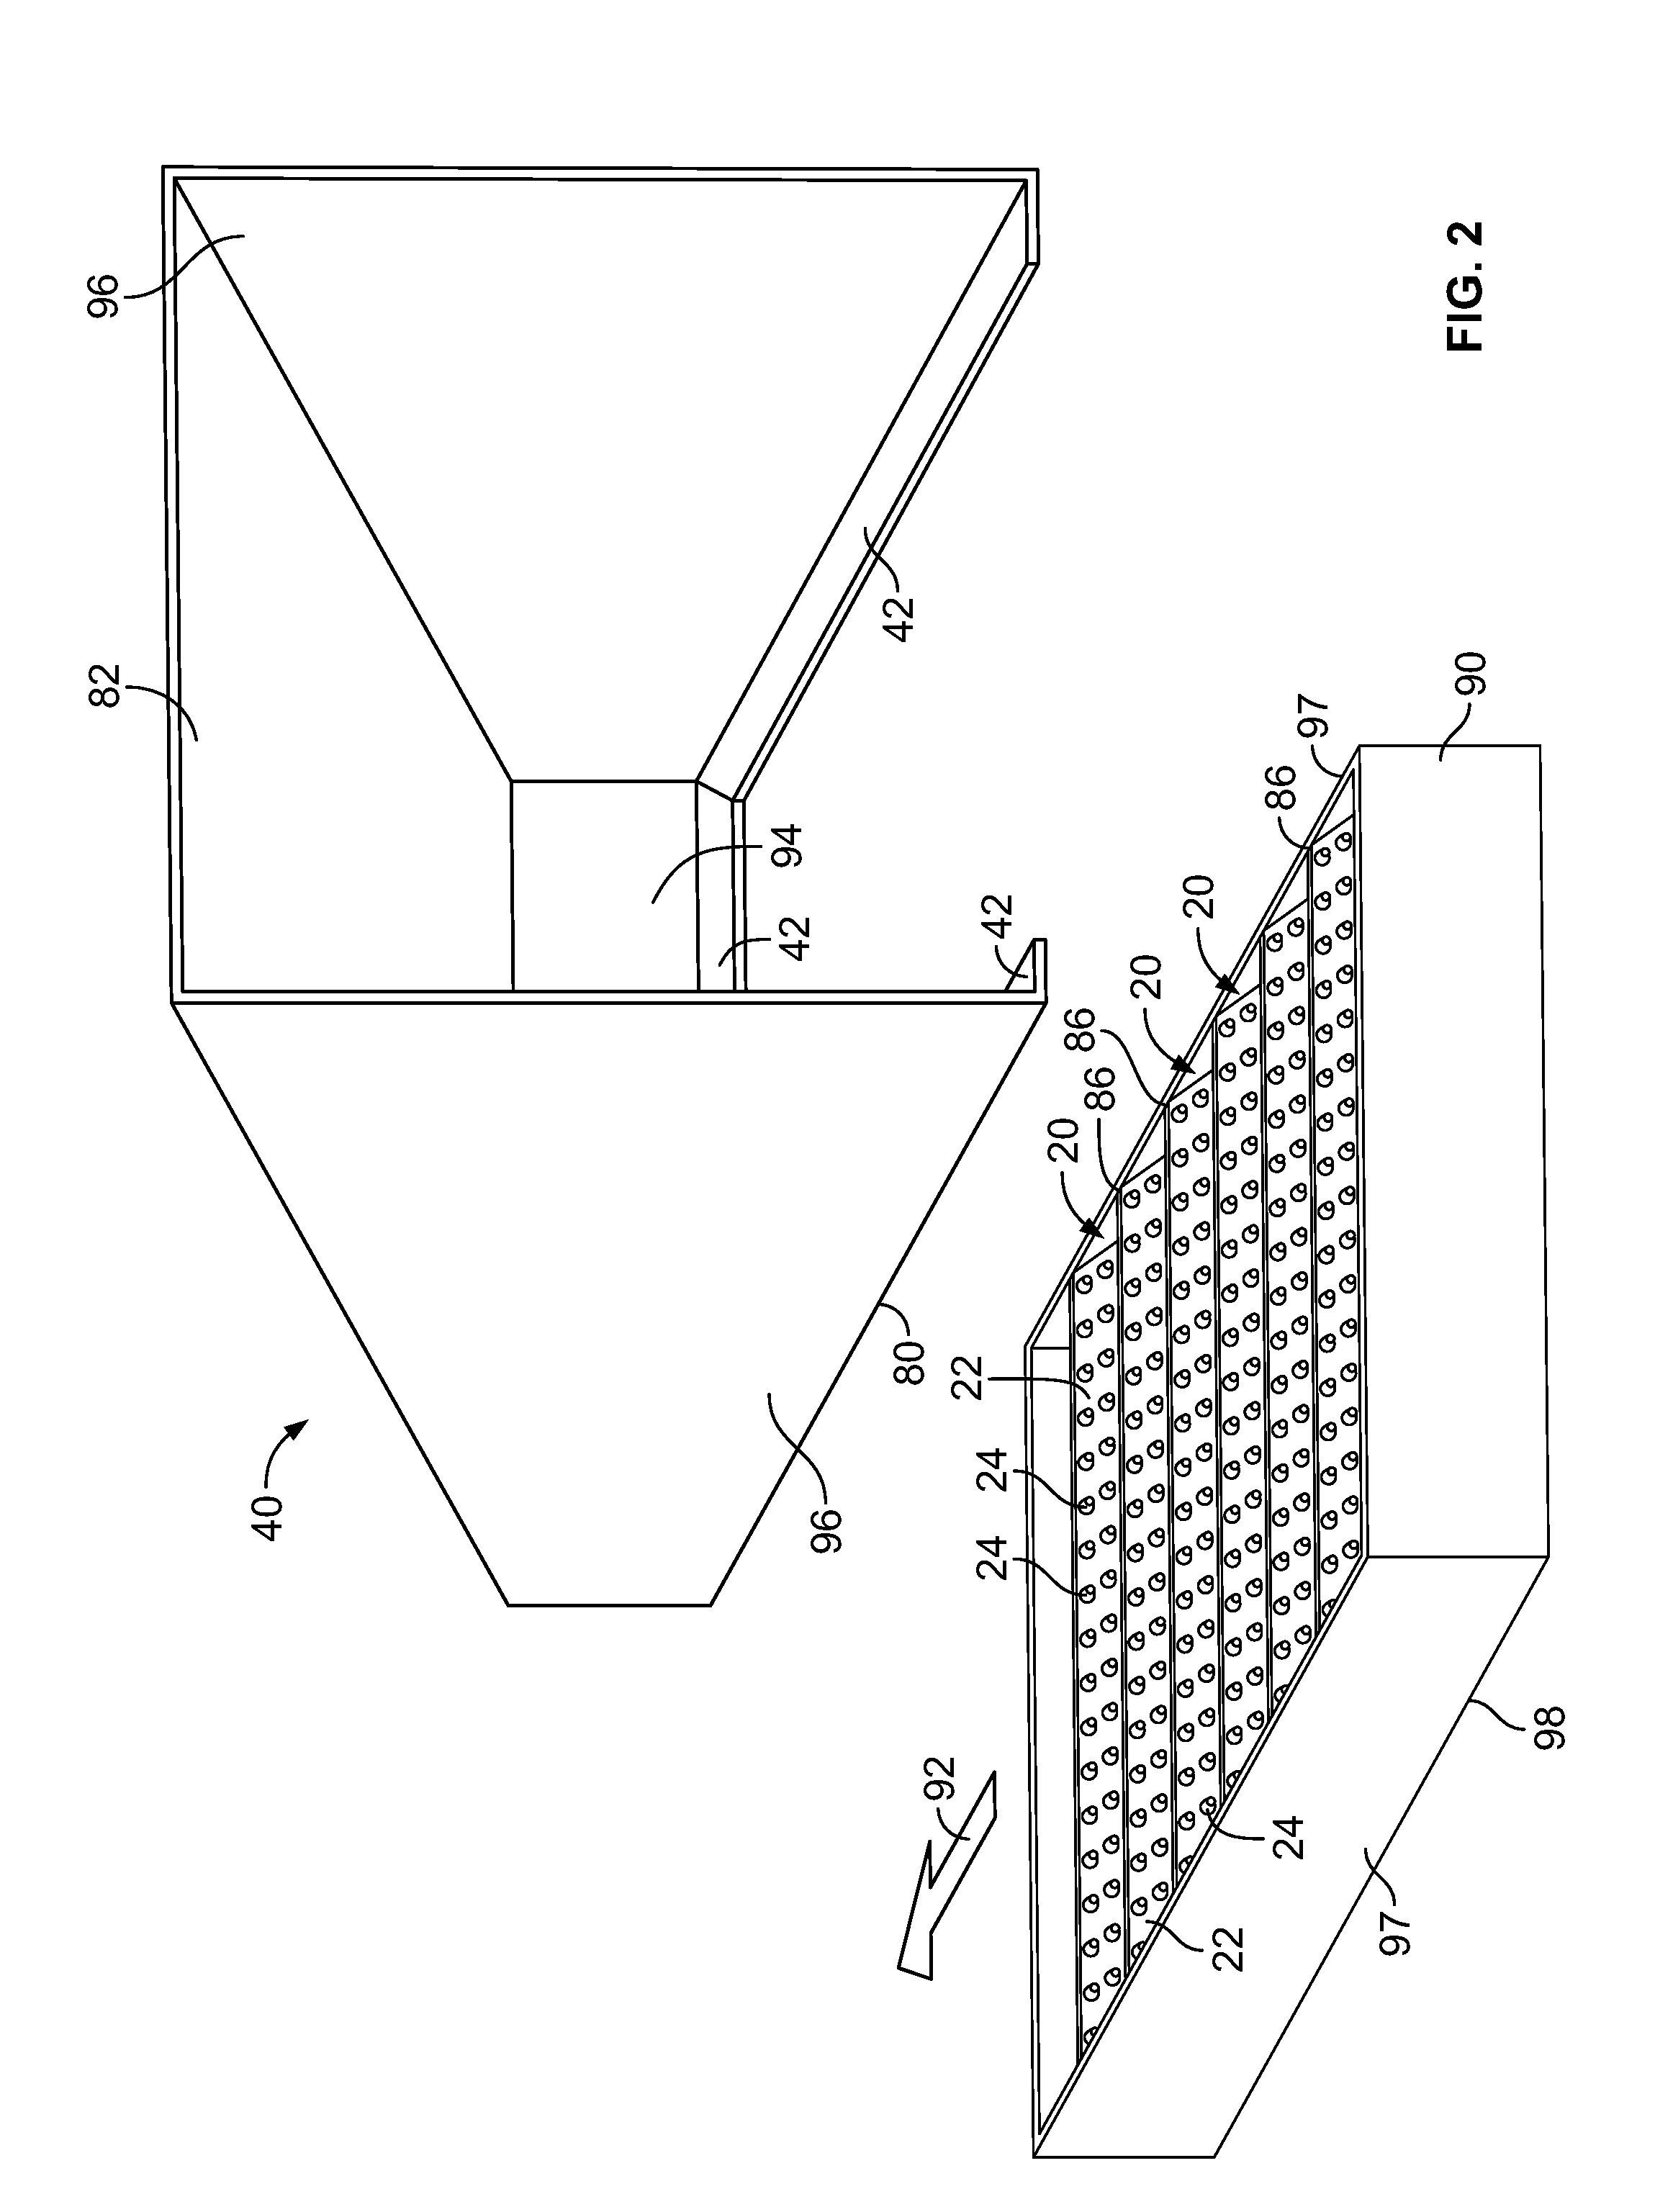 Mist eliminator, moisture removal system, and method of removing water particles from inlet air